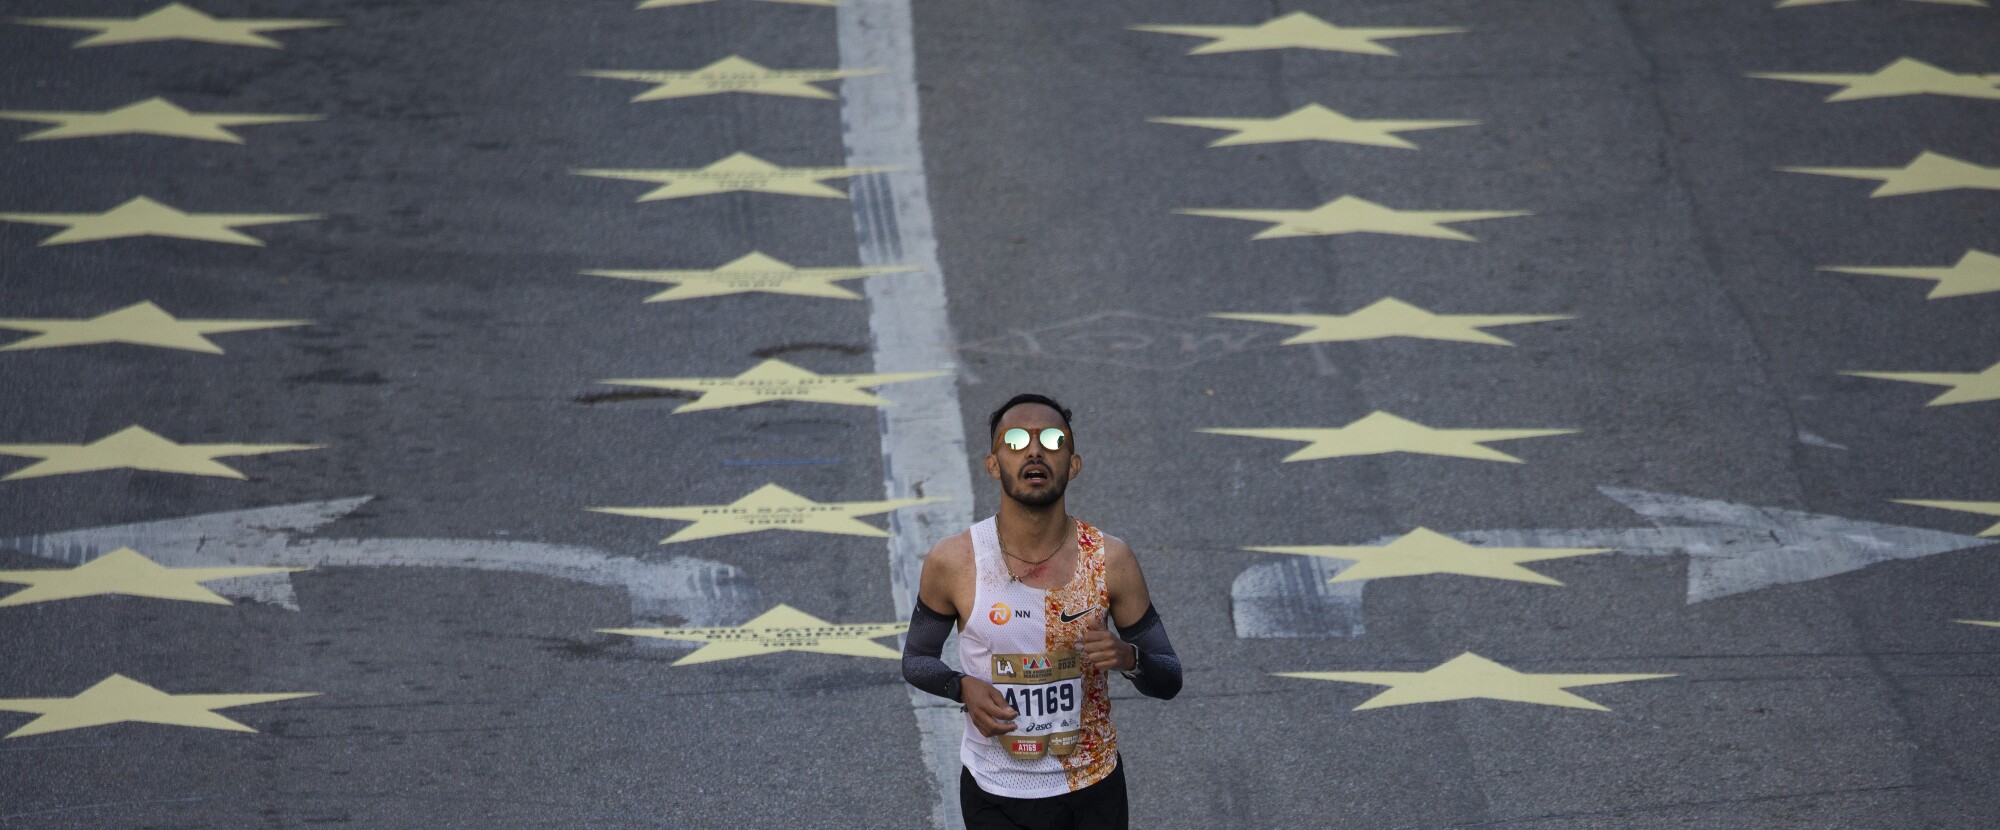 A runner crosses the finish line on Avenue of the Stars in Century City during the LA Marathon on Sunday